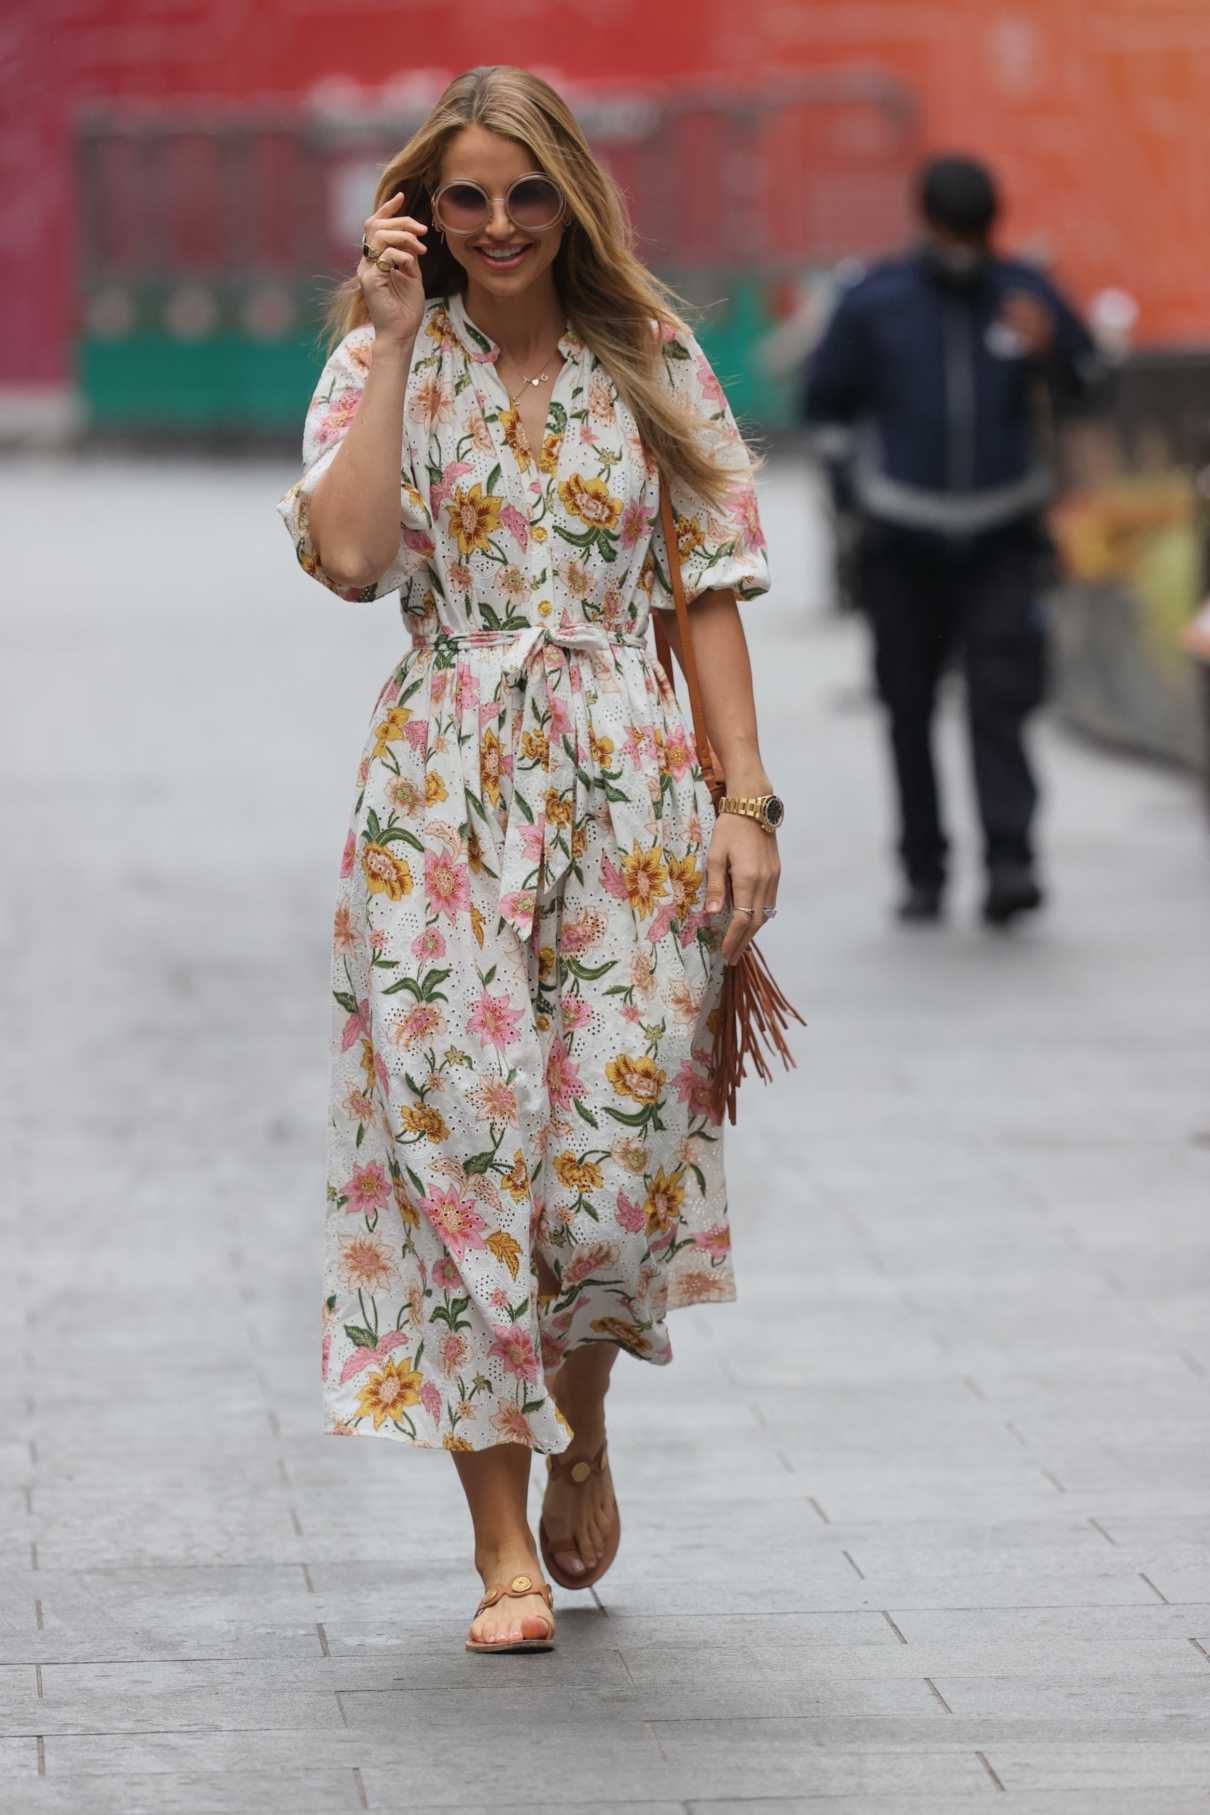 Vogue Williams in a Floral Dress